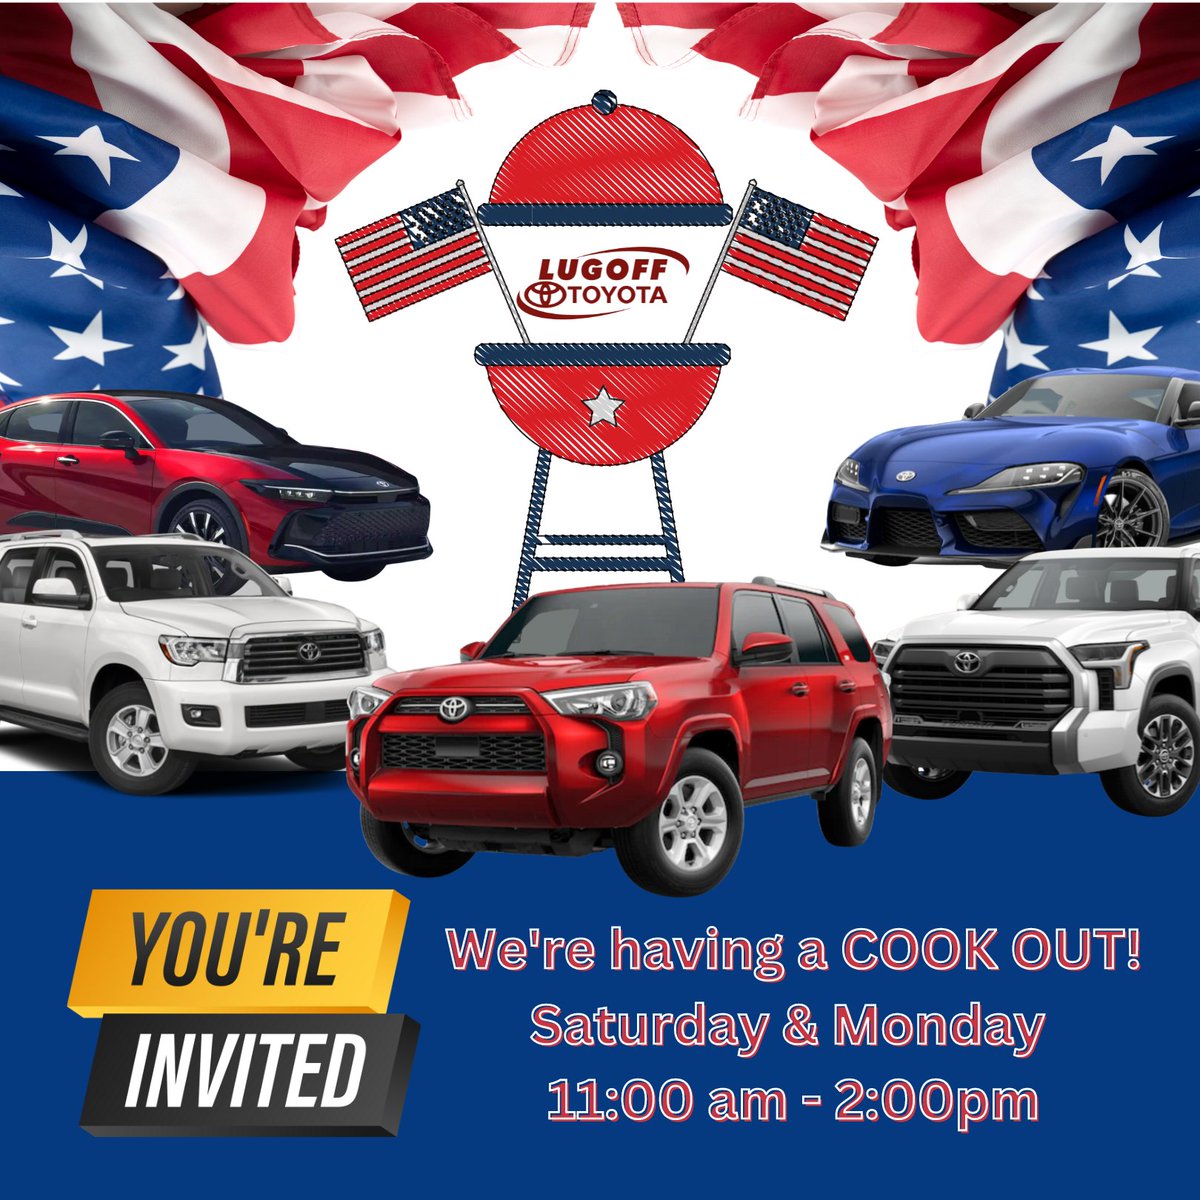 YOU'RE INVITED! 
Stop by our Cook Out and Shop with us this Memorial Day Weekend! 

SHOP, SAVE & EAT... we have you covered! 

#nothingbeatsatoyota #weareatoyotafamily  #fastfairfriendly #lugofftoyota #servicematters #toyotanation #columbiatoyota